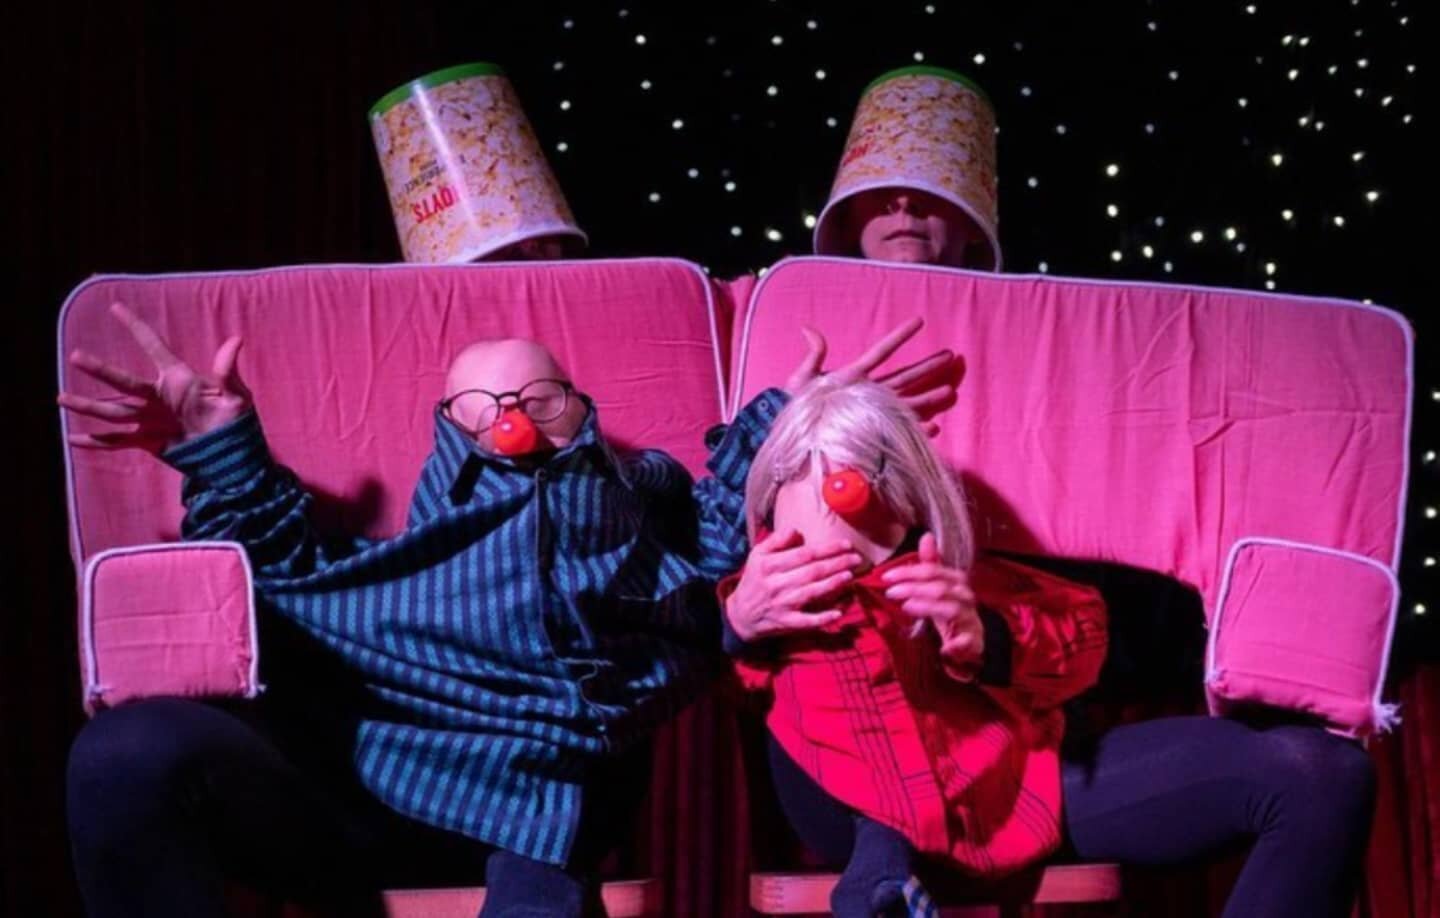 Need more puppetry in your life? The Melbourne Festival of Puppetry kicks off next week @lamamatheatre ❤️. The Puppetsmithery and Puppetvision are presenting Puppetry Potluck next Saturday night, a variety show with a whole lotta different flavours! 